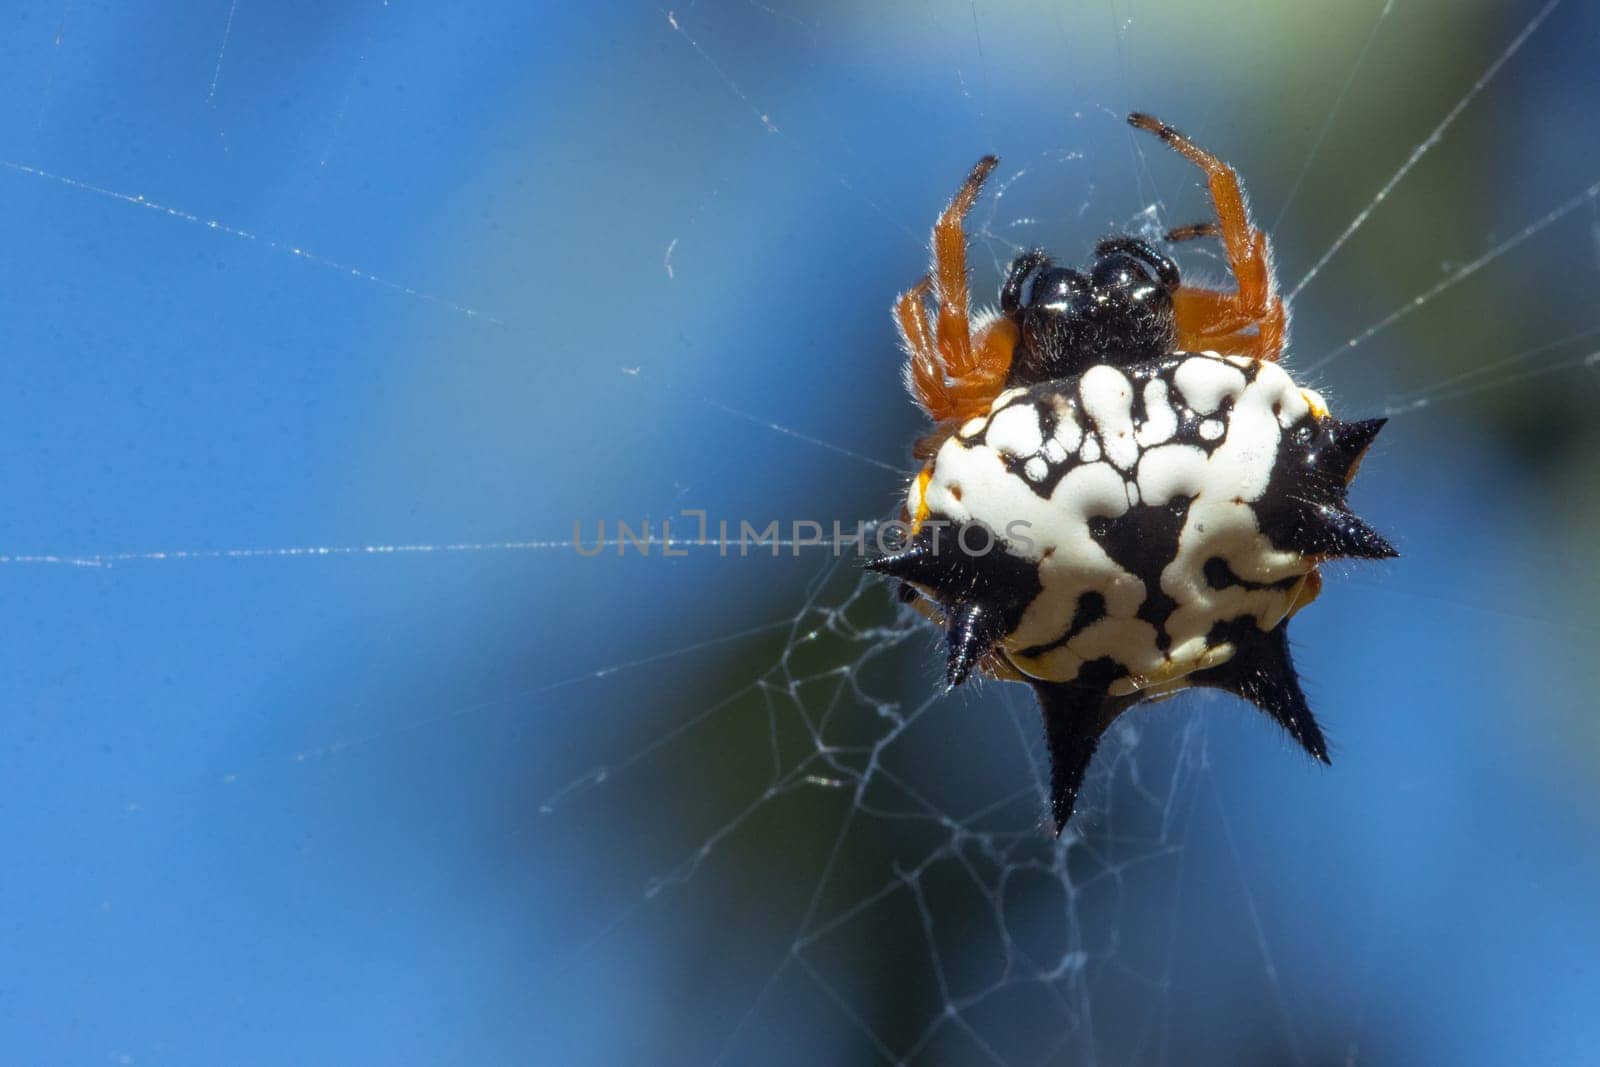 Intricate macro shot of a Jewel Spider, Austracantha minax, in its web. The arachnid's striking patterns and vivid colors illuminate its natural beauty.